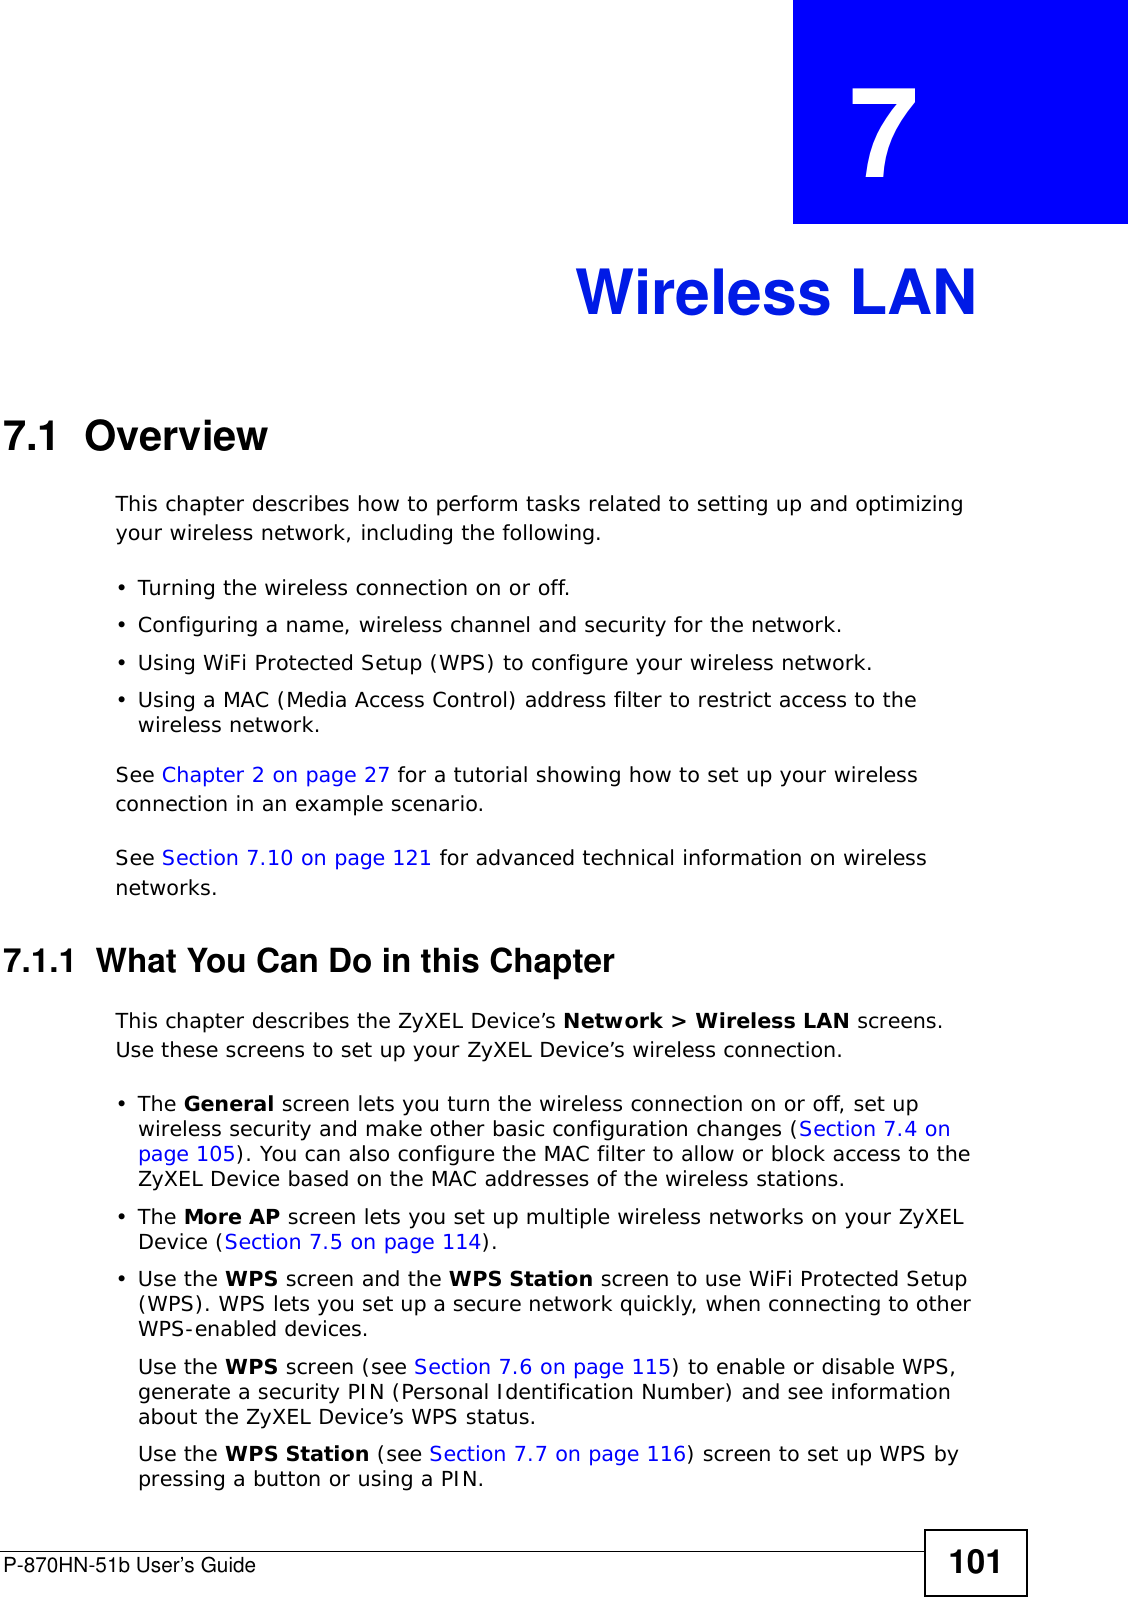 P-870HN-51b User’s Guide 101CHAPTER  7 Wireless LAN7.1  Overview This chapter describes how to perform tasks related to setting up and optimizing your wireless network, including the following.• Turning the wireless connection on or off.• Configuring a name, wireless channel and security for the network.• Using WiFi Protected Setup (WPS) to configure your wireless network.• Using a MAC (Media Access Control) address filter to restrict access to the wireless network.See Chapter 2 on page 27 for a tutorial showing how to set up your wireless connection in an example scenario.See Section 7.10 on page 121 for advanced technical information on wireless networks.7.1.1  What You Can Do in this ChapterThis chapter describes the ZyXEL Device’s Network &gt; Wireless LAN screens. Use these screens to set up your ZyXEL Device’s wireless connection.•The General screen lets you turn the wireless connection on or off, set up wireless security and make other basic configuration changes (Section 7.4 on page 105). You can also configure the MAC filter to allow or block access to the ZyXEL Device based on the MAC addresses of the wireless stations.•The More AP screen lets you set up multiple wireless networks on your ZyXEL Device (Section 7.5 on page 114).•Use the WPS screen and the WPS Station screen to use WiFi Protected Setup (WPS). WPS lets you set up a secure network quickly, when connecting to other WPS-enabled devices. Use the WPS screen (see Section 7.6 on page 115) to enable or disable WPS, generate a security PIN (Personal Identification Number) and see information about the ZyXEL Device’s WPS status.Use the WPS Station (see Section 7.7 on page 116) screen to set up WPS by pressing a button or using a PIN.